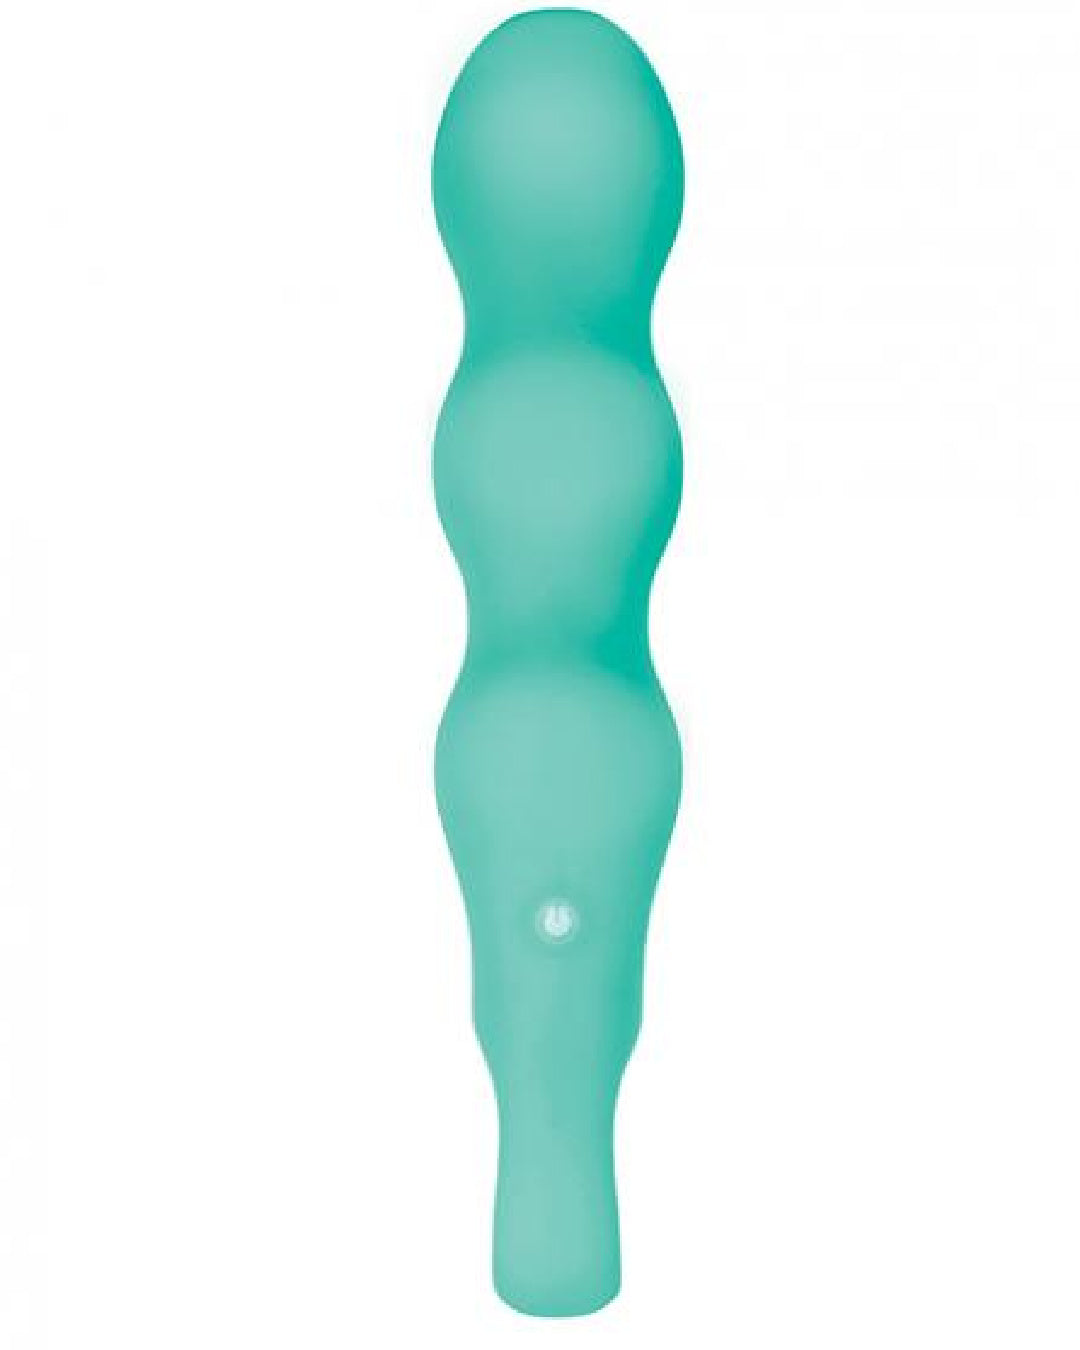 Triple Back view of mint green Teaser Powerful 3 Motor Silicone Vibrator